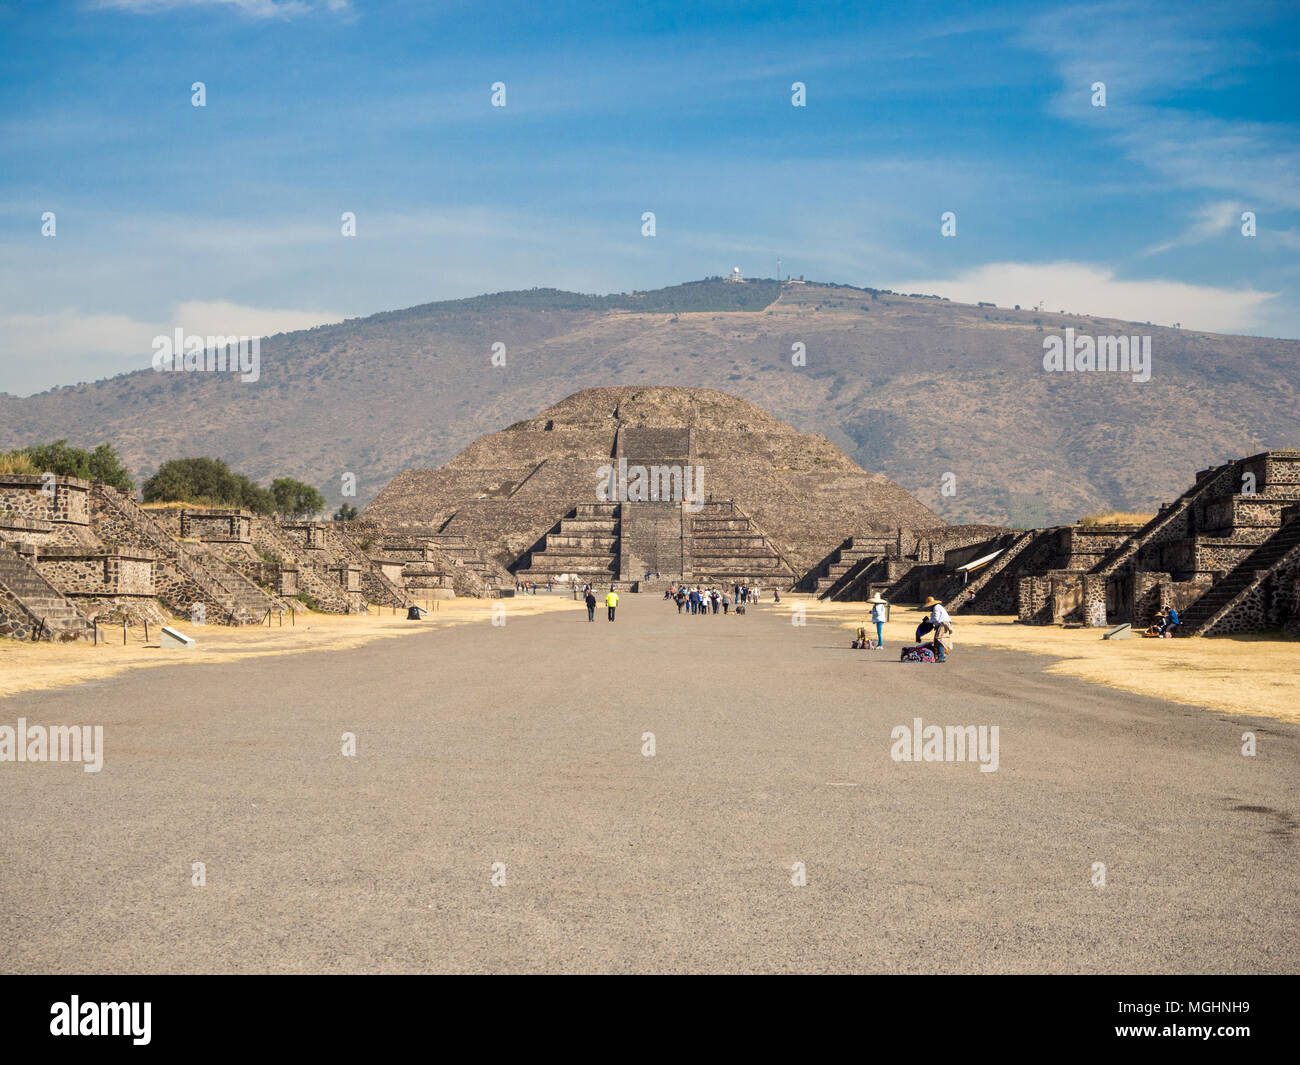 Teotihuacan, Mexico City, Mexico, South America [The Great Pyramid of ...